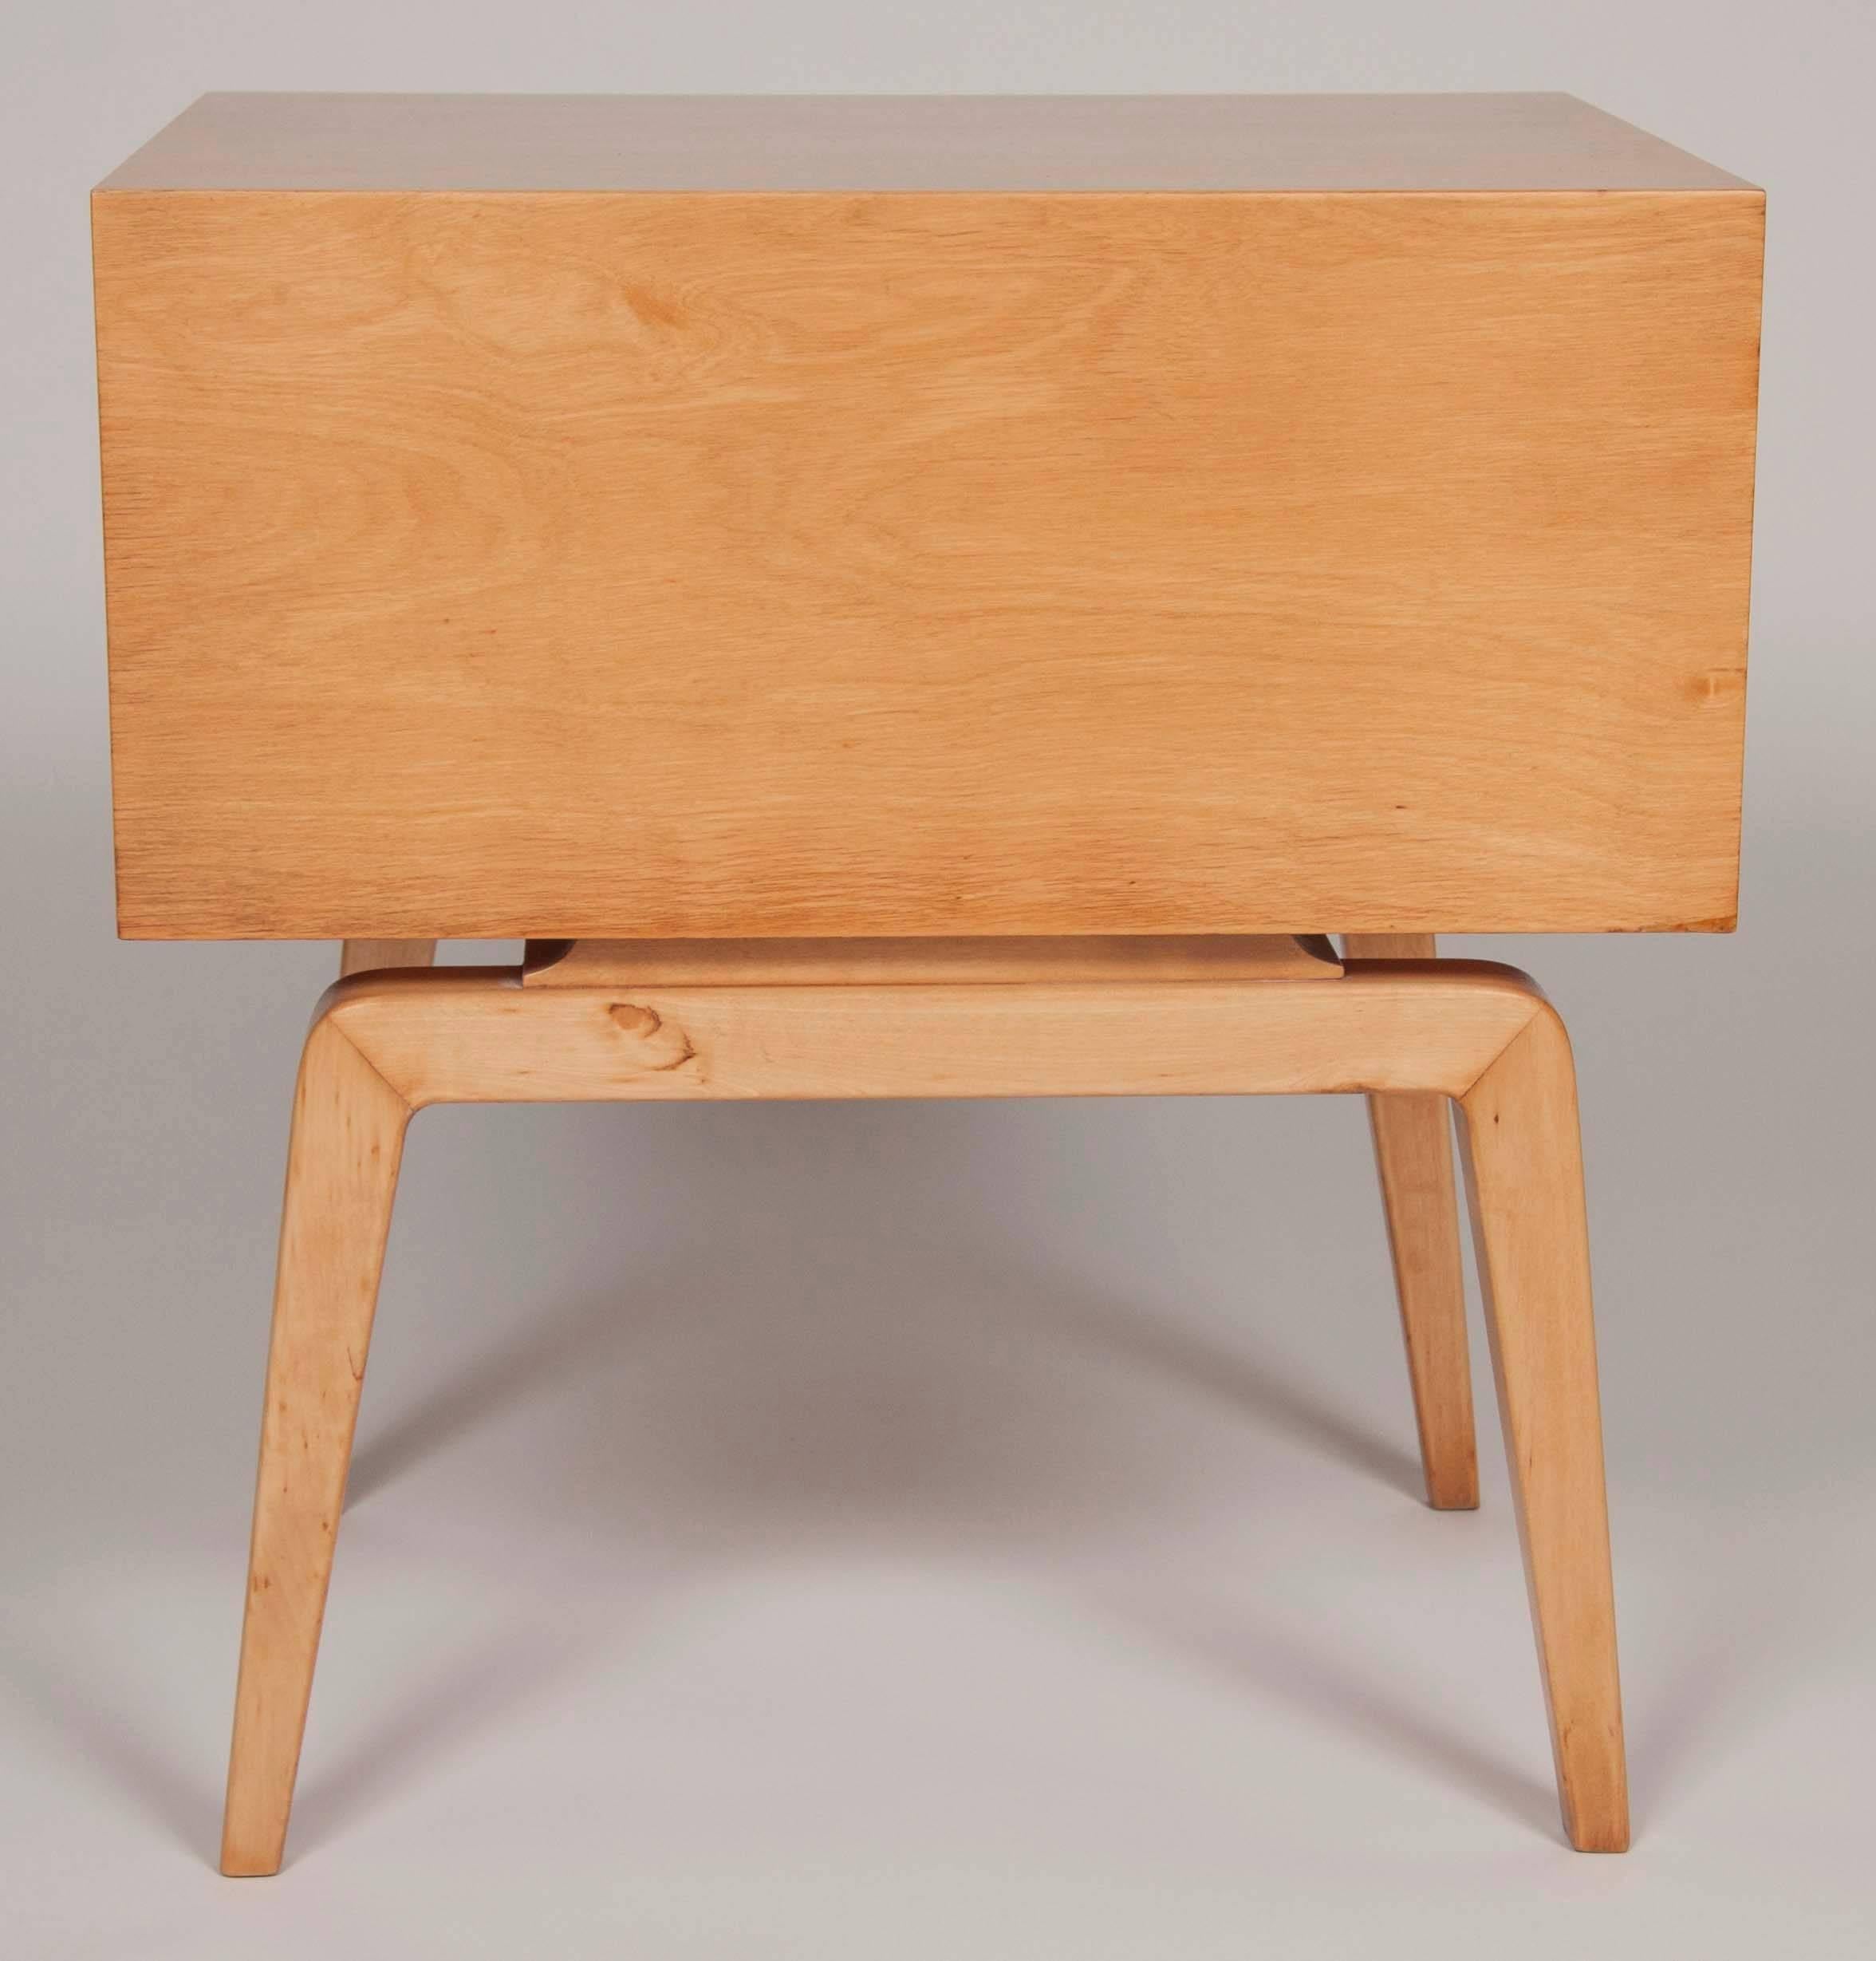 Pair of Bedside Tables by Edmond Spence 1